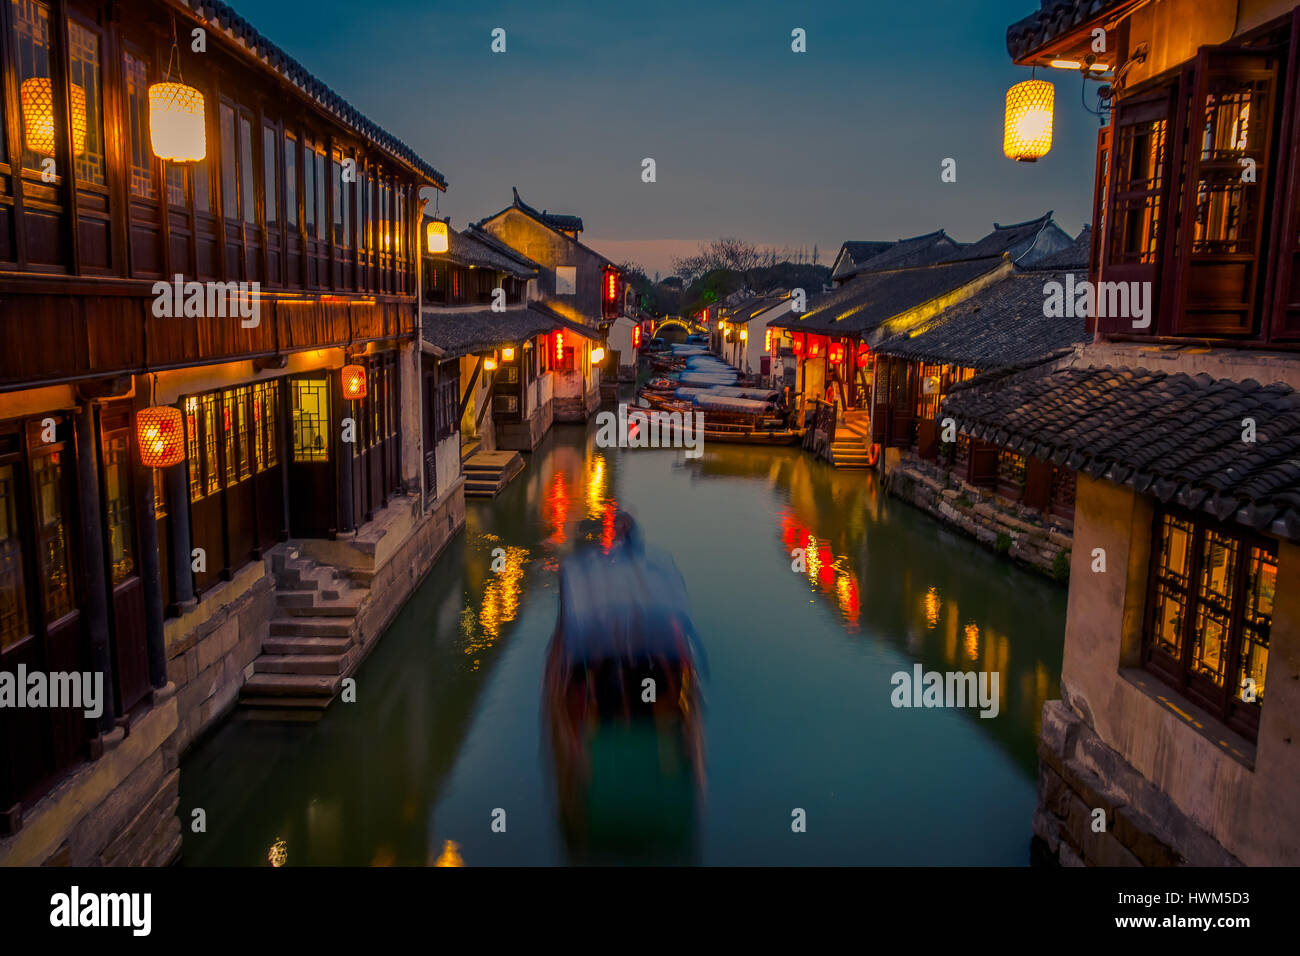 SHANGHAI, CHINA: Beautiful evening light creates magic mood inside Zhouzhuang water town, ancient city district with channels and old buildings, charming popular tourist area Stock Photo